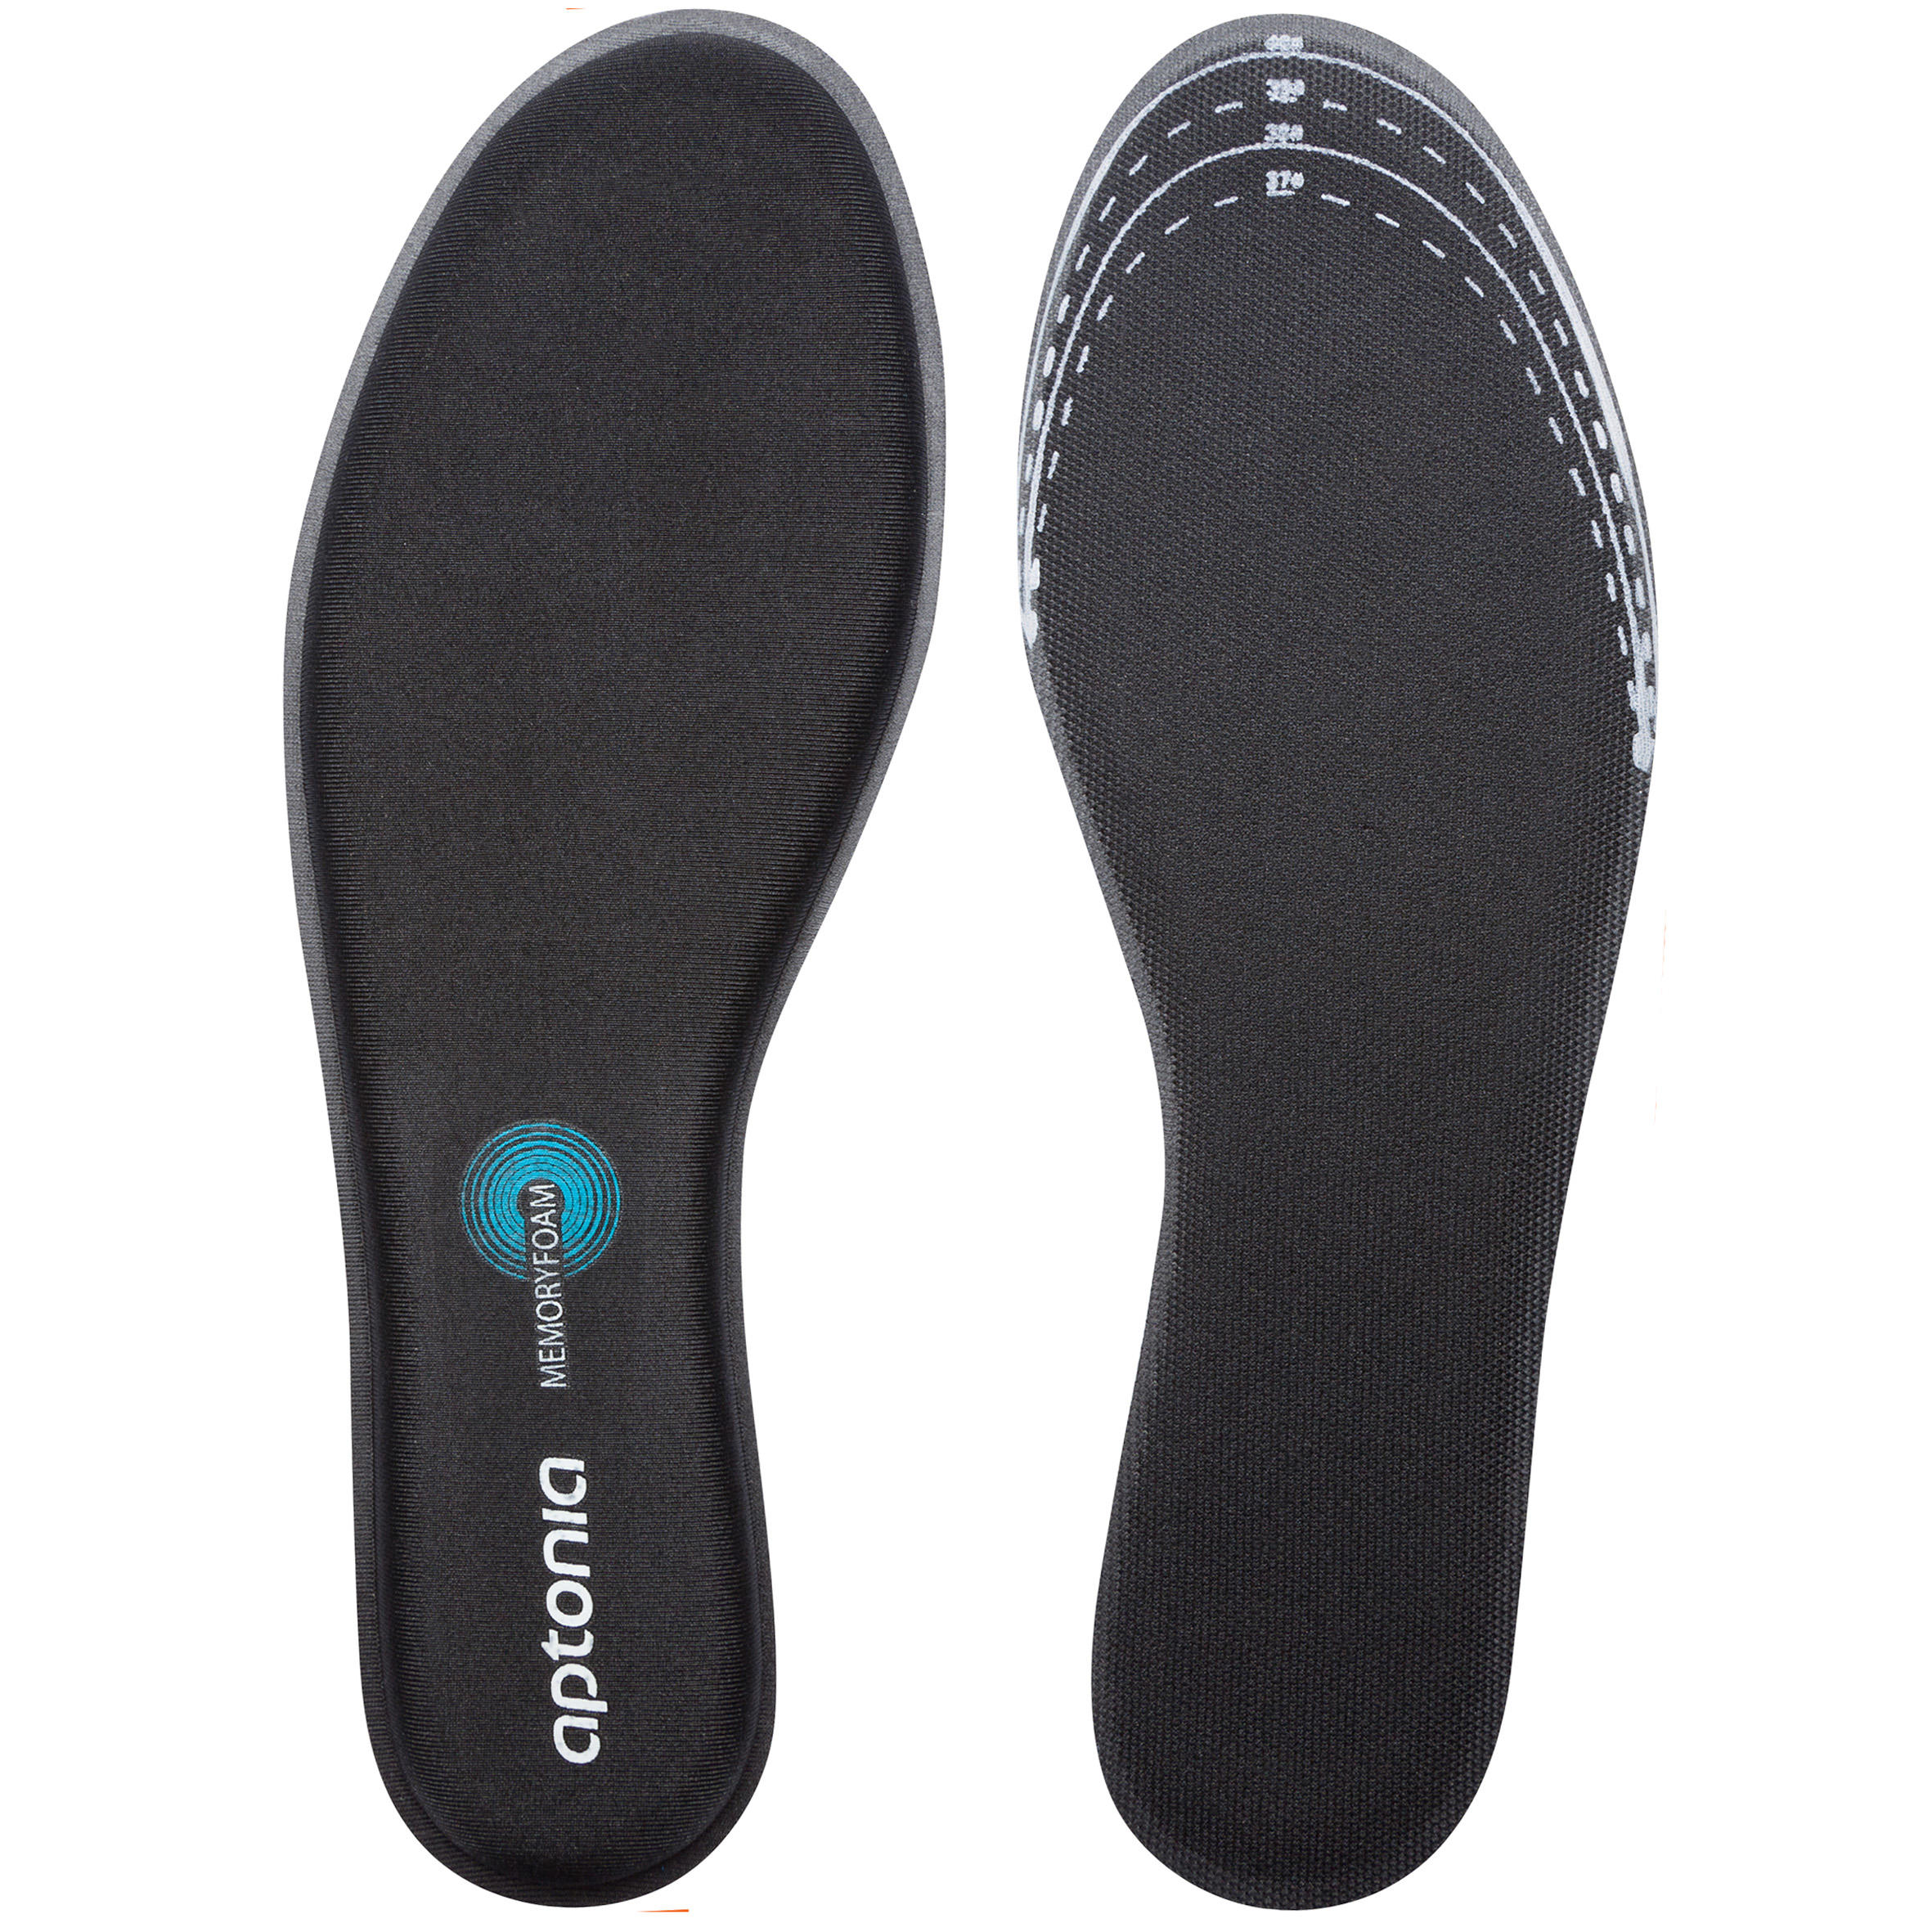 mens shoes with memory foam insole